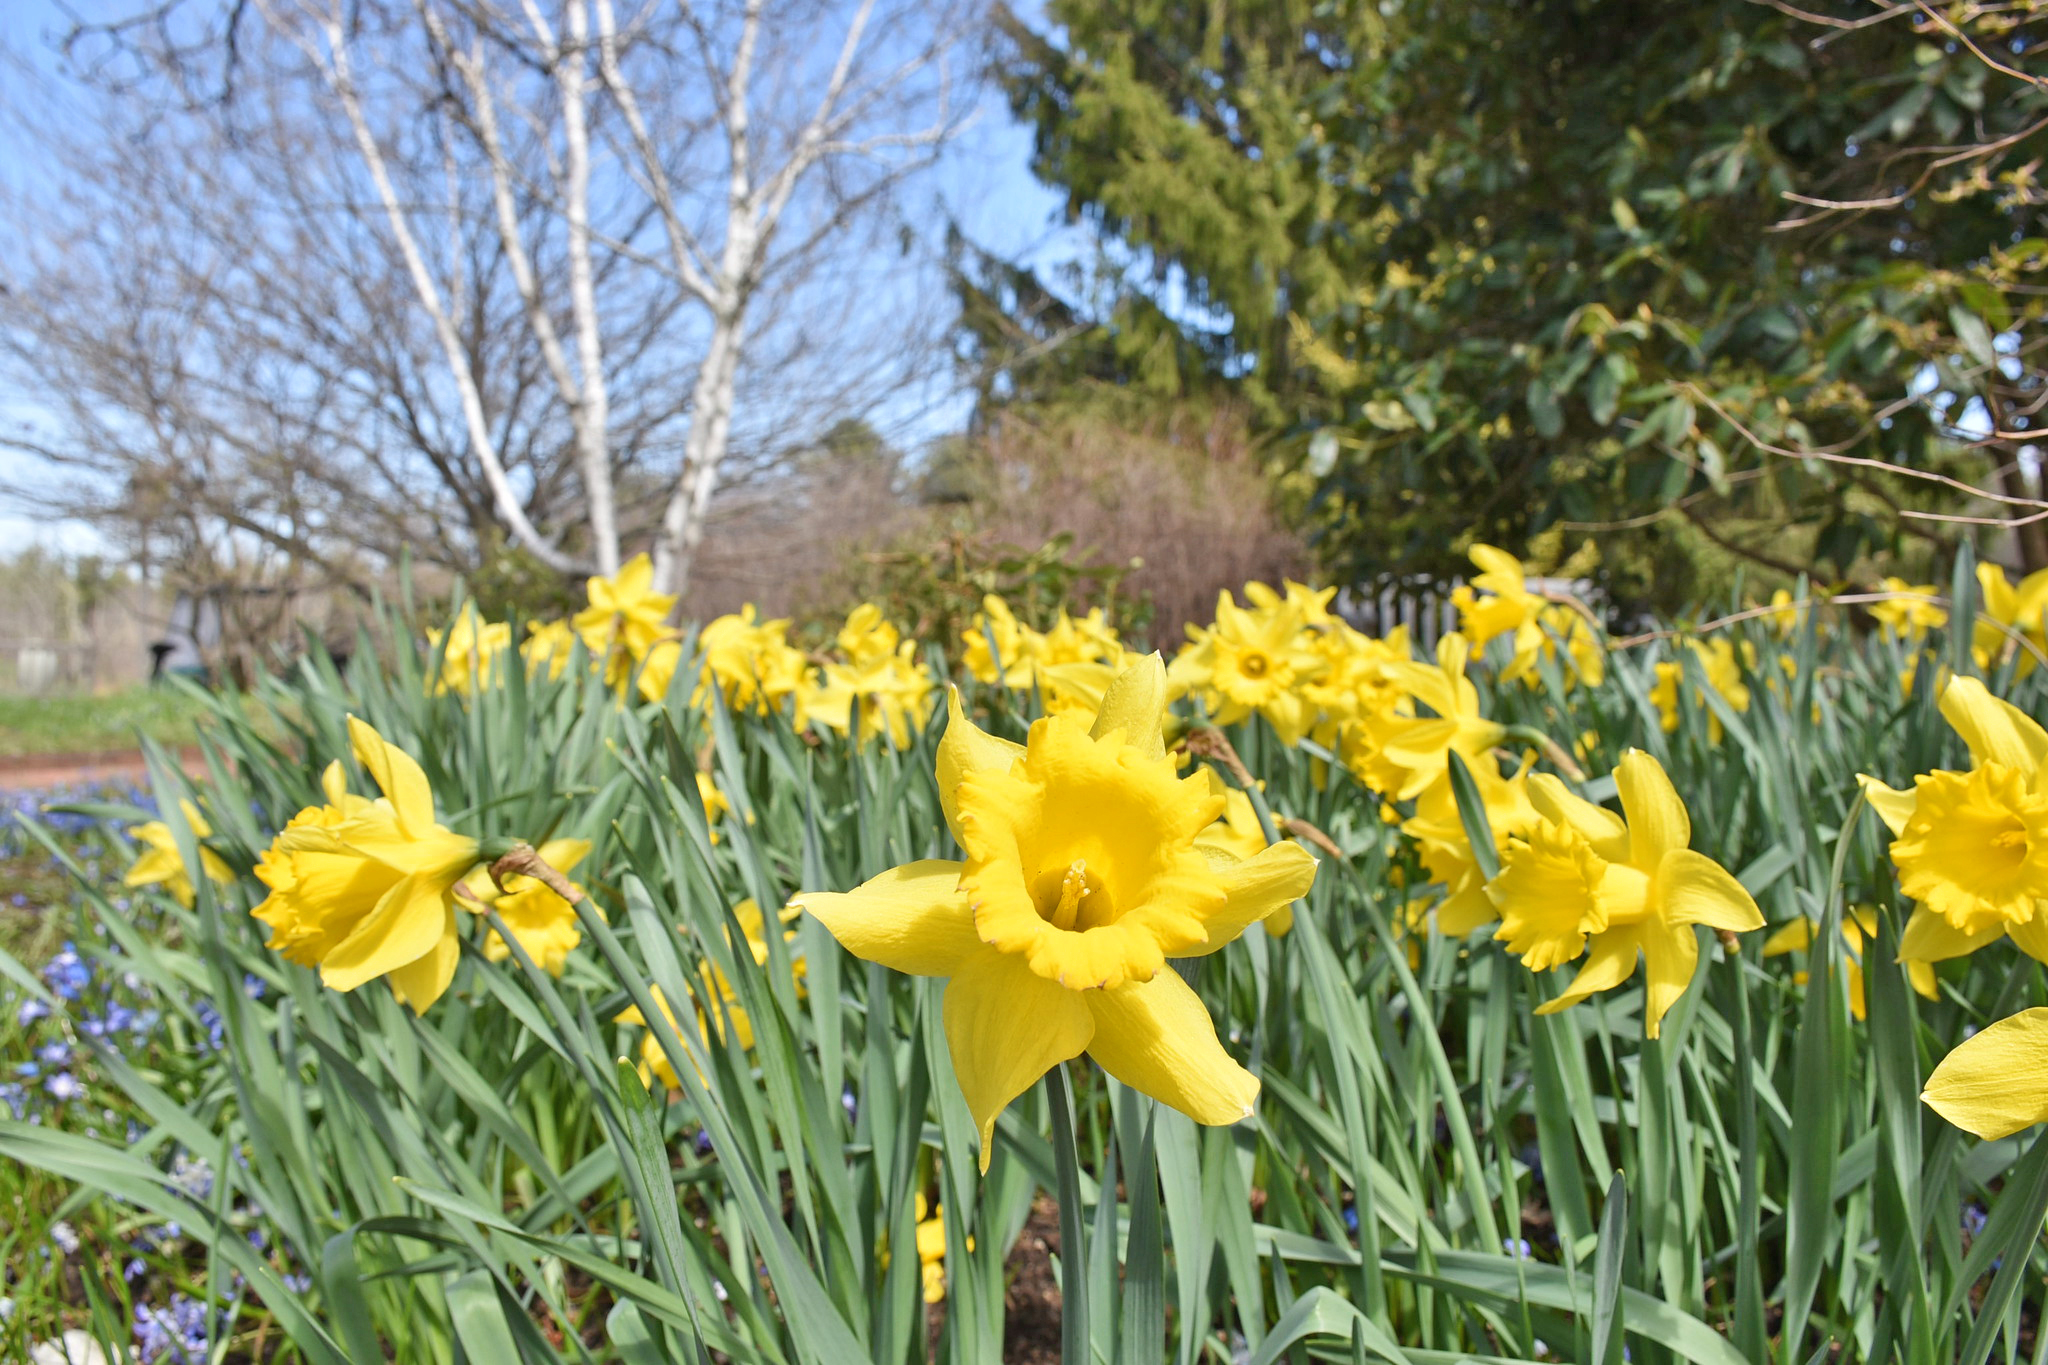 Bright yellow daffodils in bloom in the Lawn Garden.